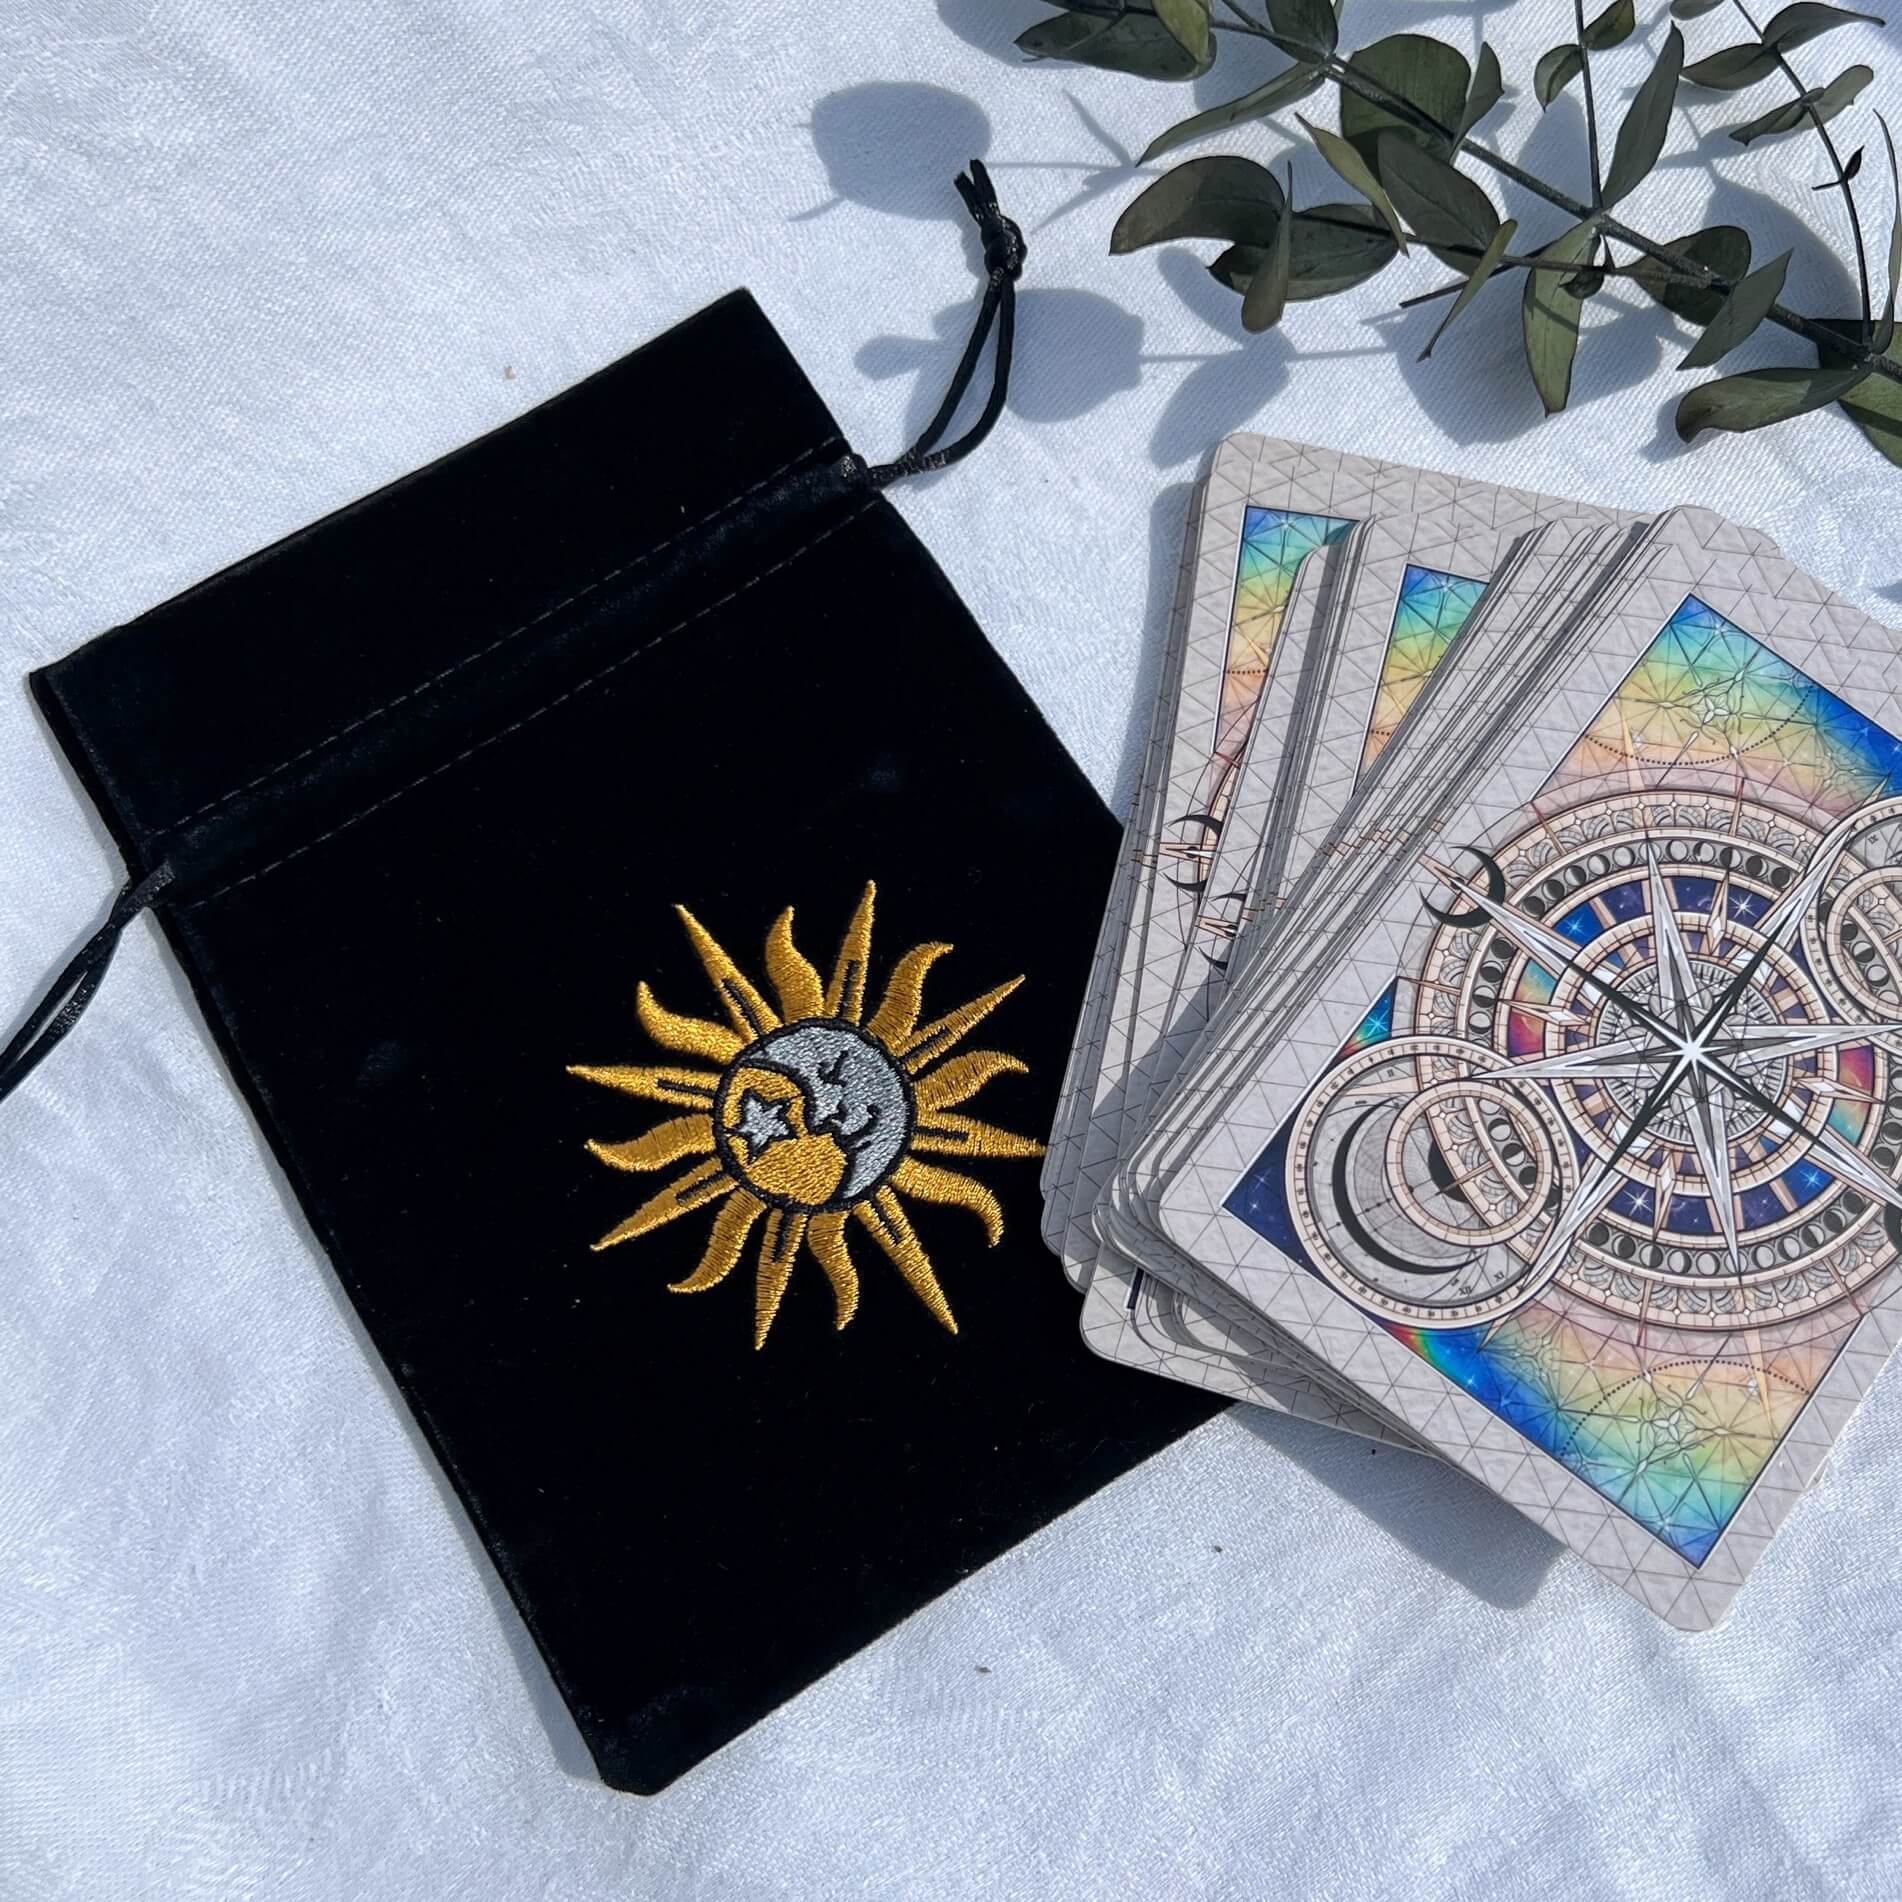 Black velvet celestial oracle card bag with an embroidered sun and moon emblem and astro realms oracle deck